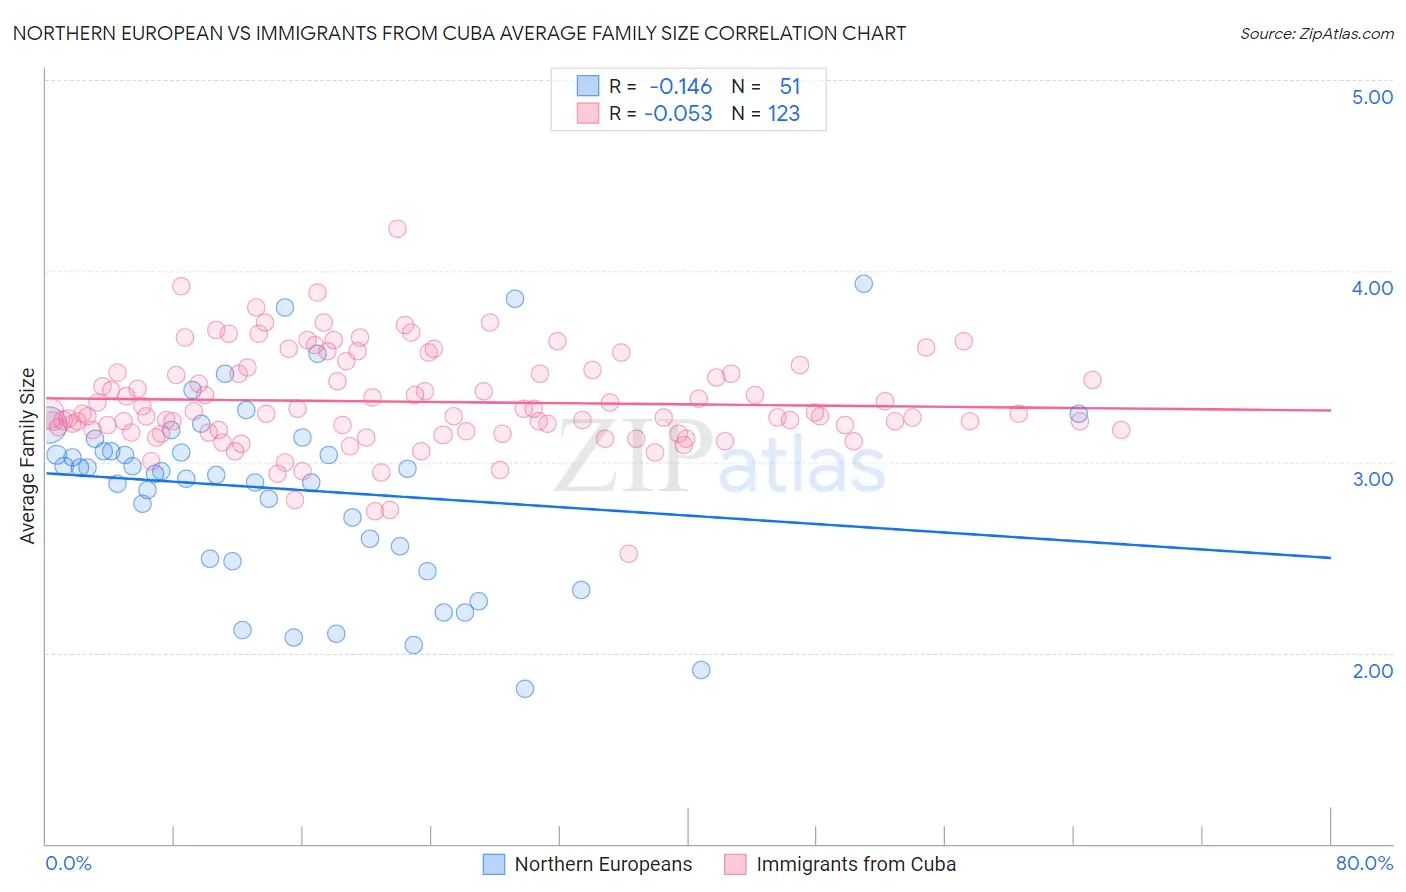 Northern European vs Immigrants from Cuba Average Family Size